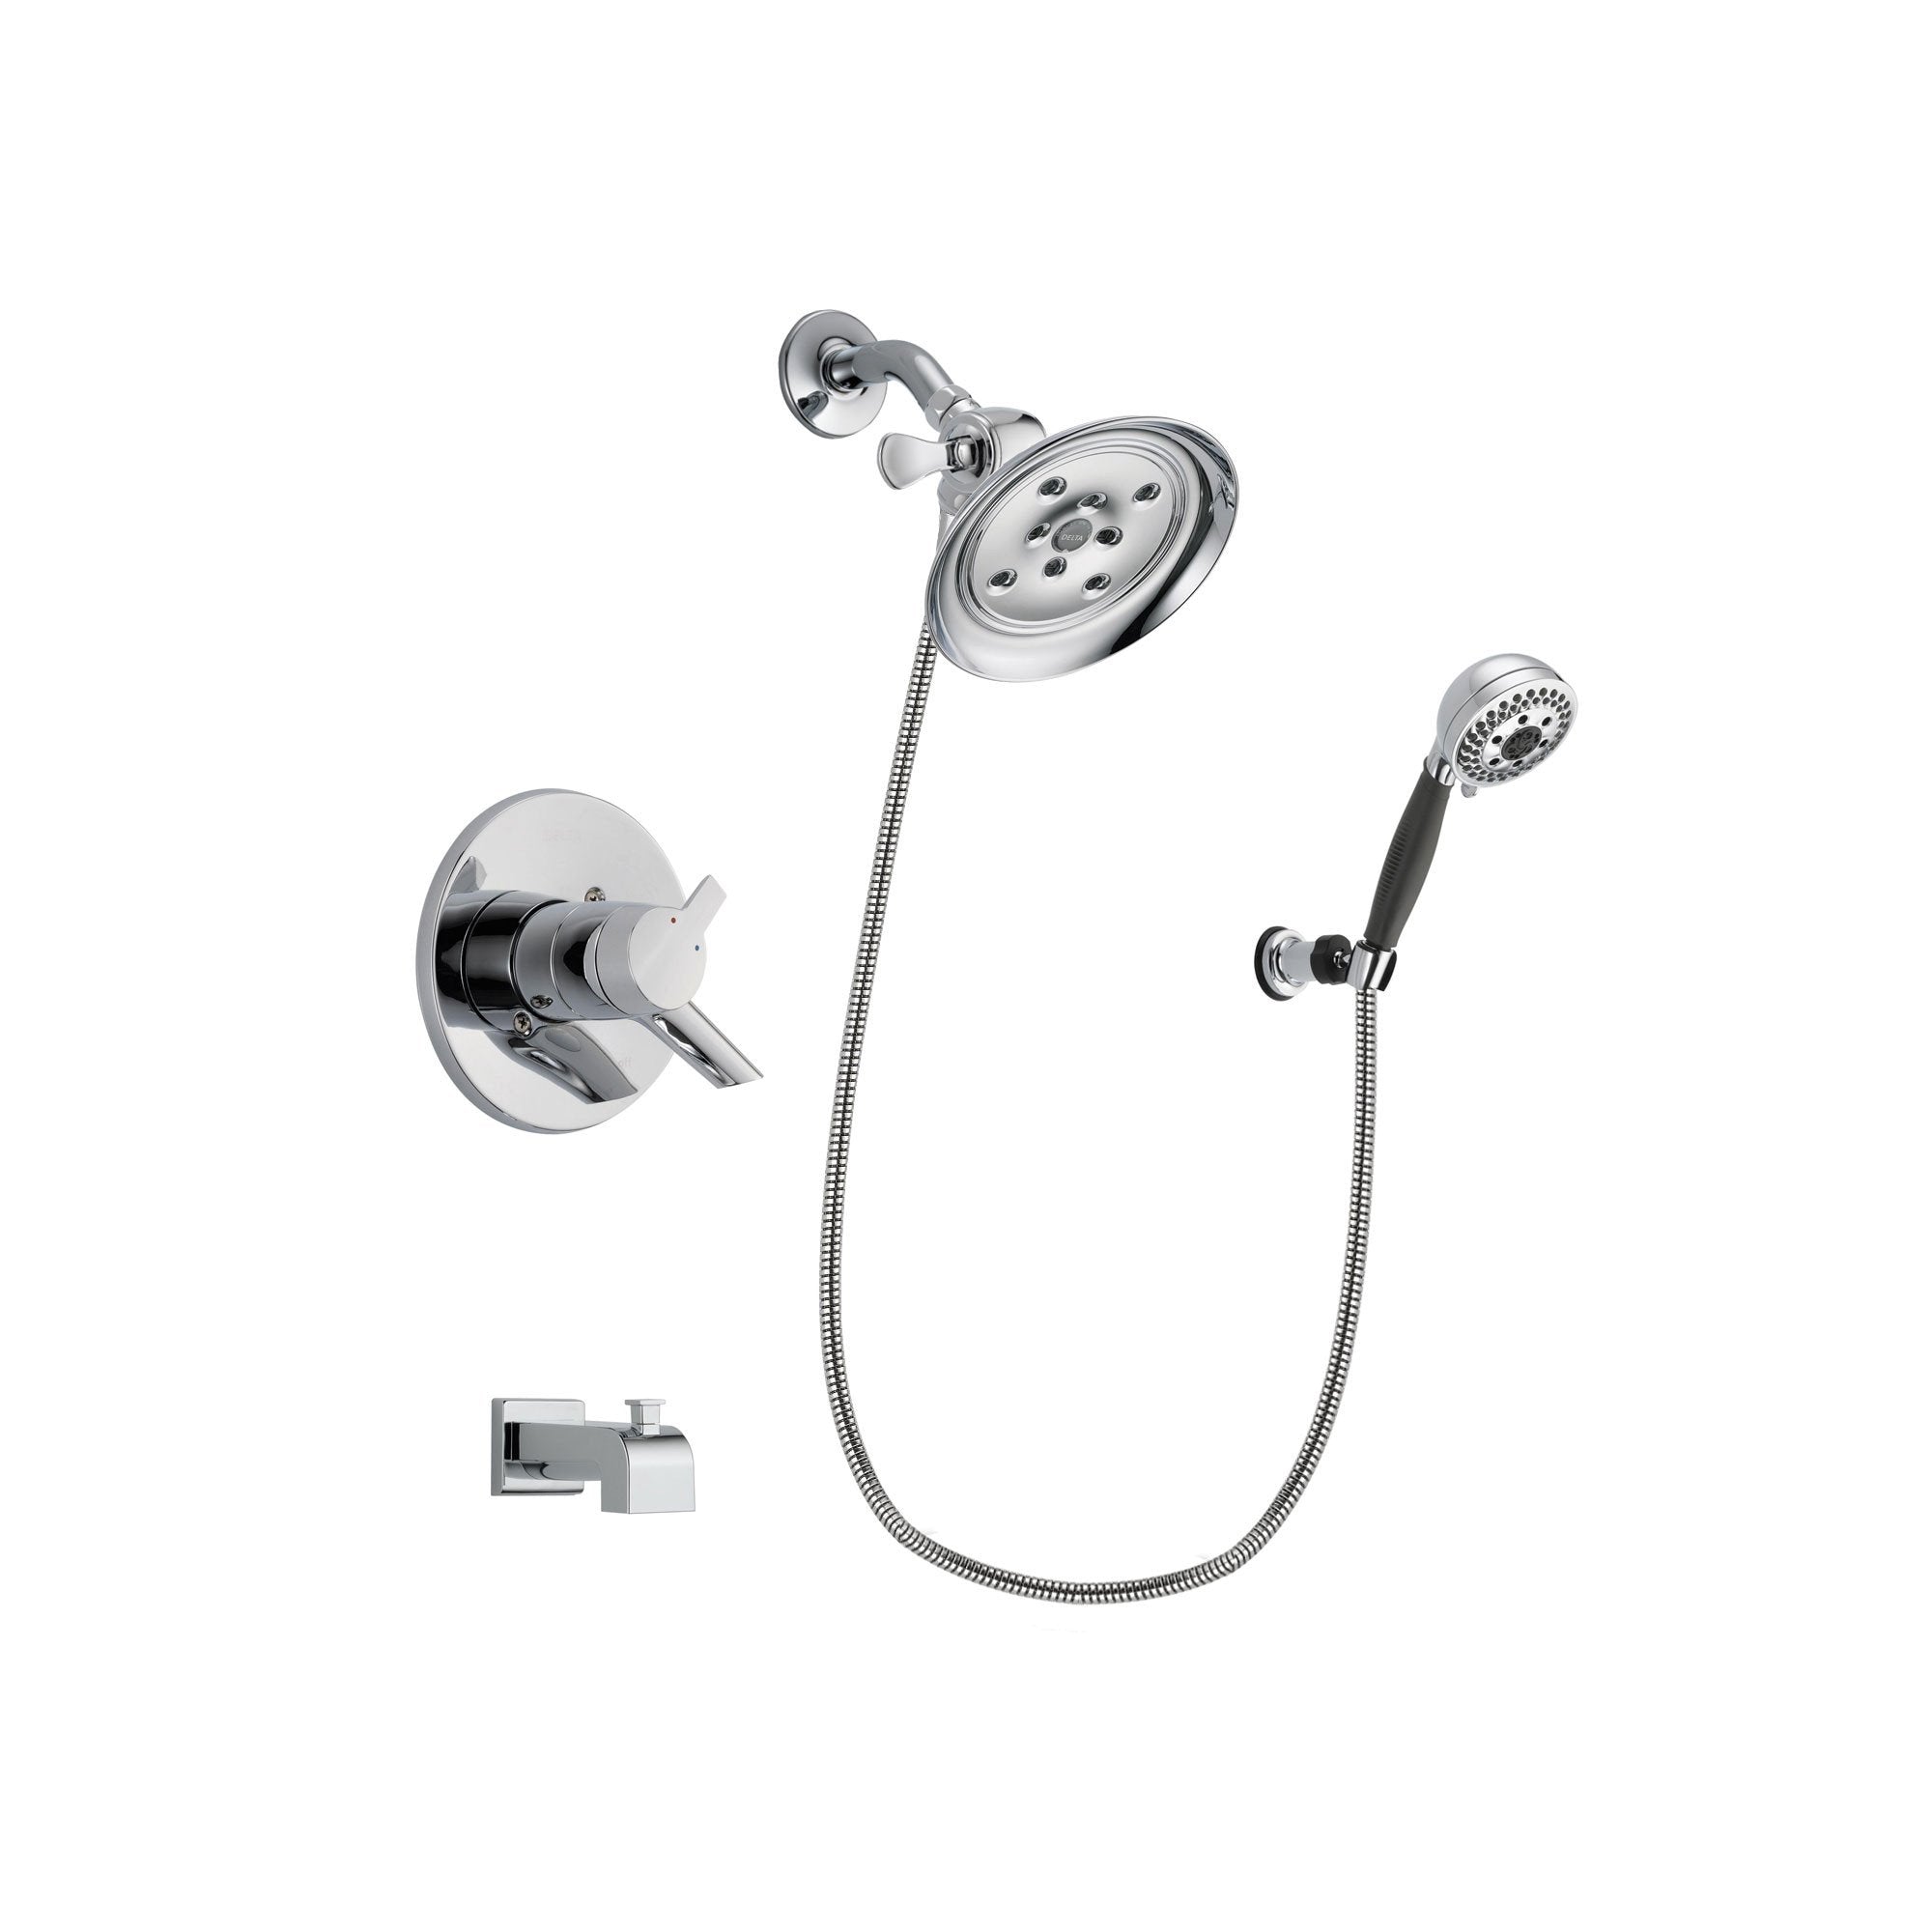 Delta Compel Chrome Tub and Shower Faucet System with Hand Shower DSP1197V